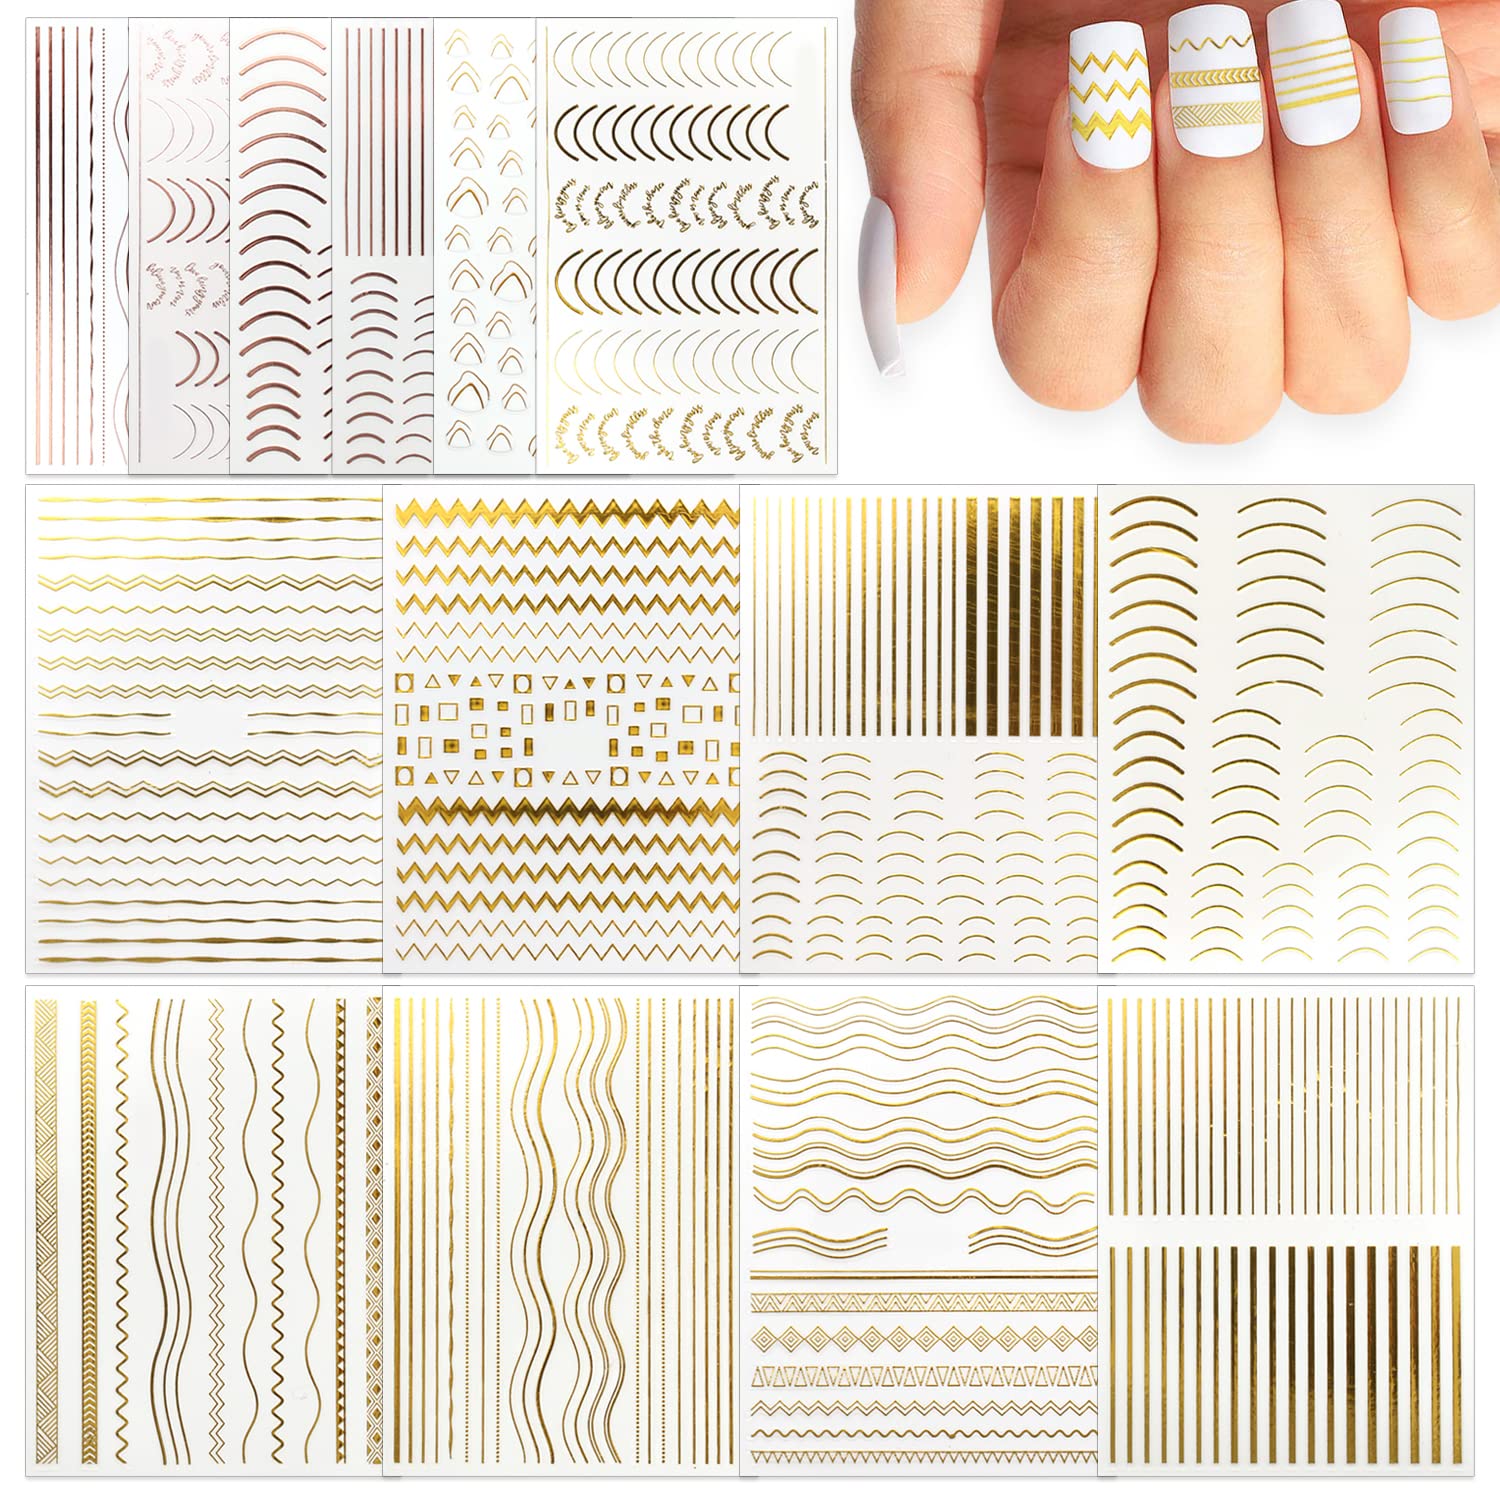  8 Sheets French Line Nails Art Stamping Plate